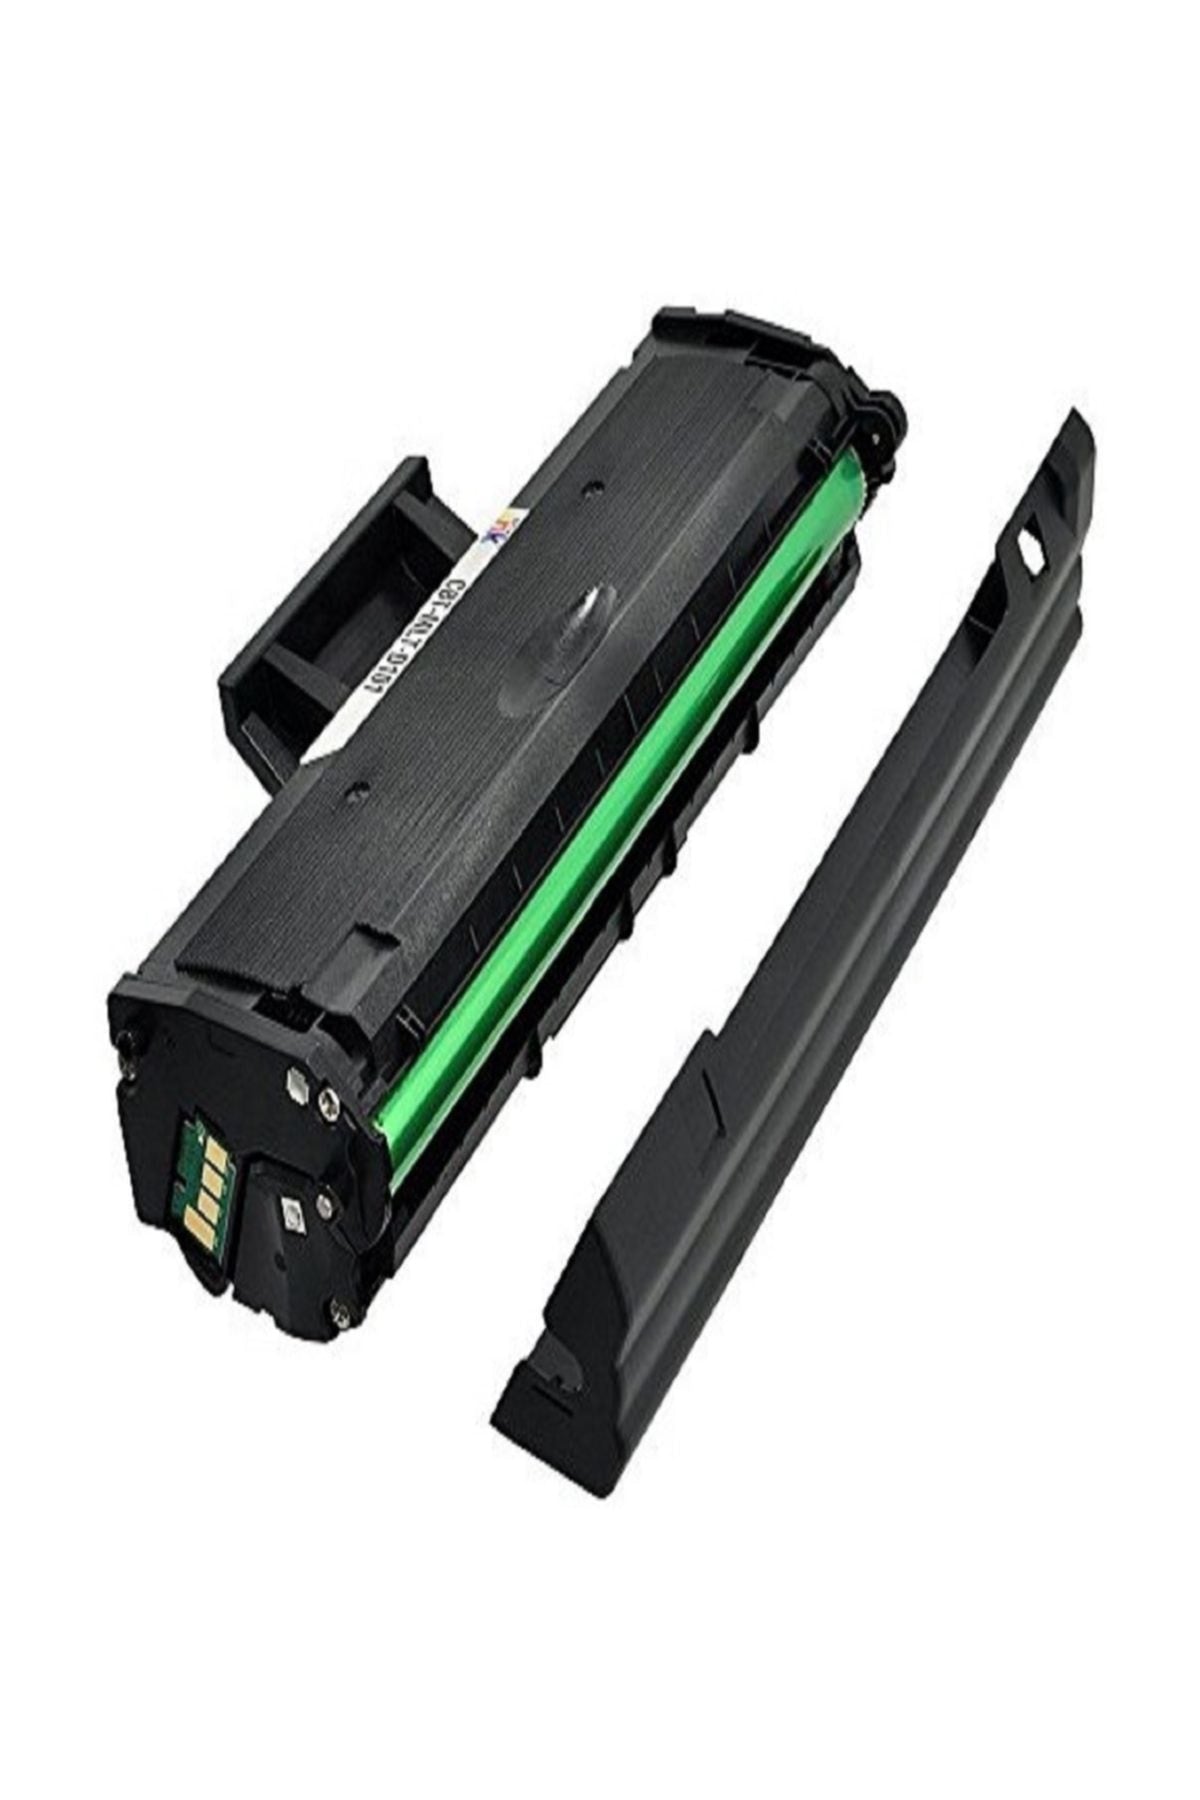 Compatible Xerox 3020 3025 Workcentre Phaser Equivalent Toner 106r02773 High Quality 3020-3025 with Chip Workcentre Phaser Part